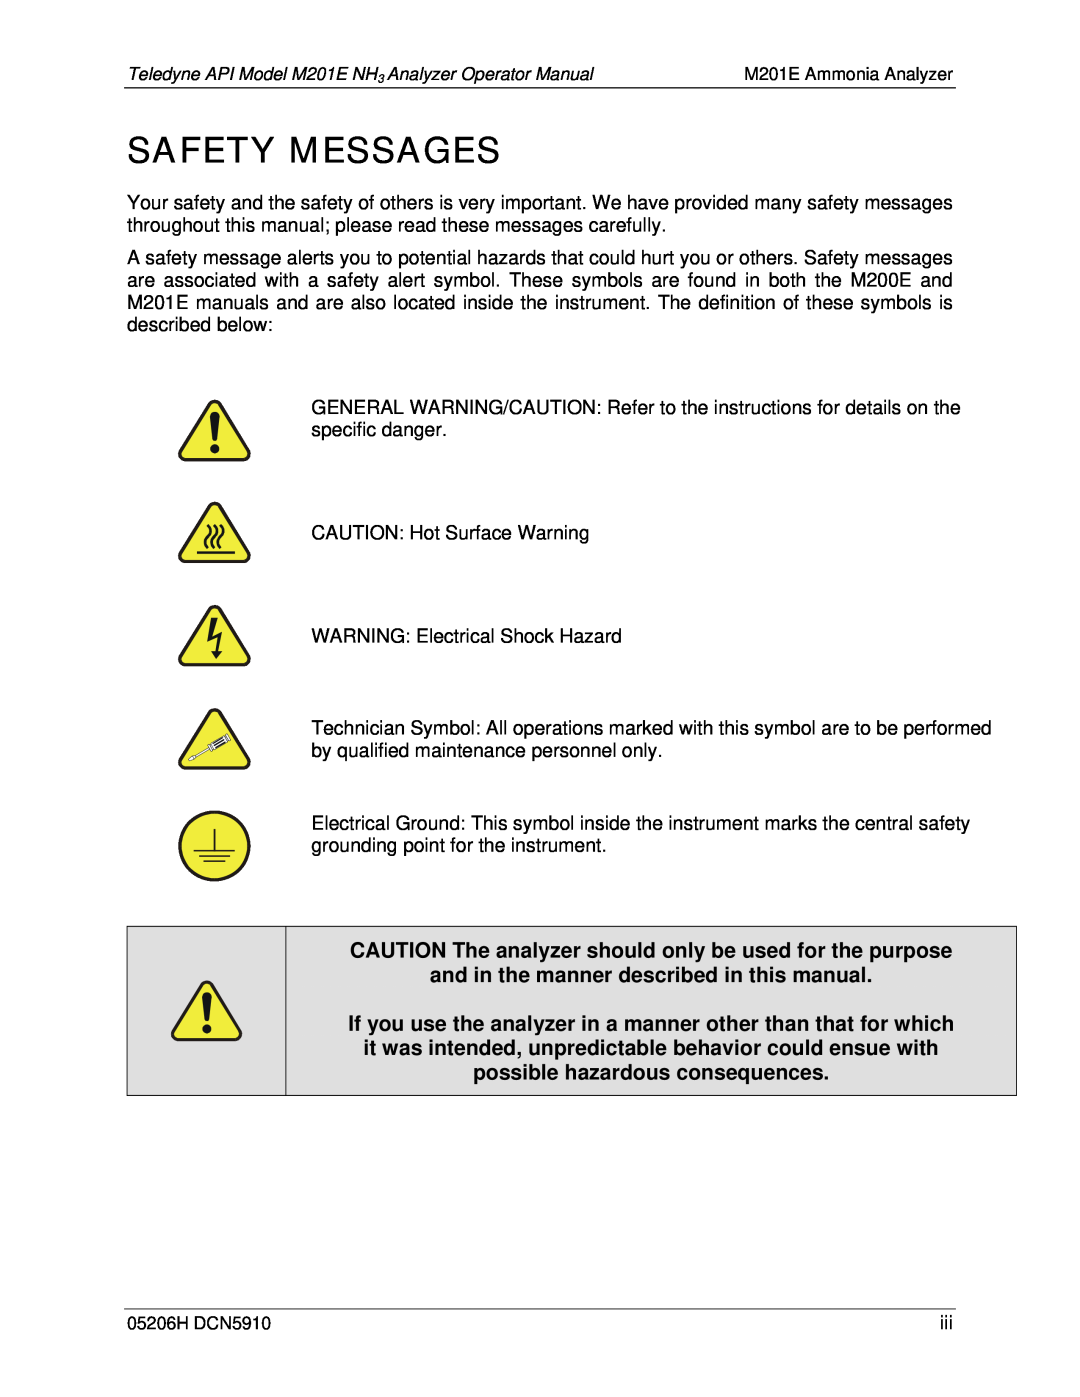 Teledyne M201E manual Safety Messages 